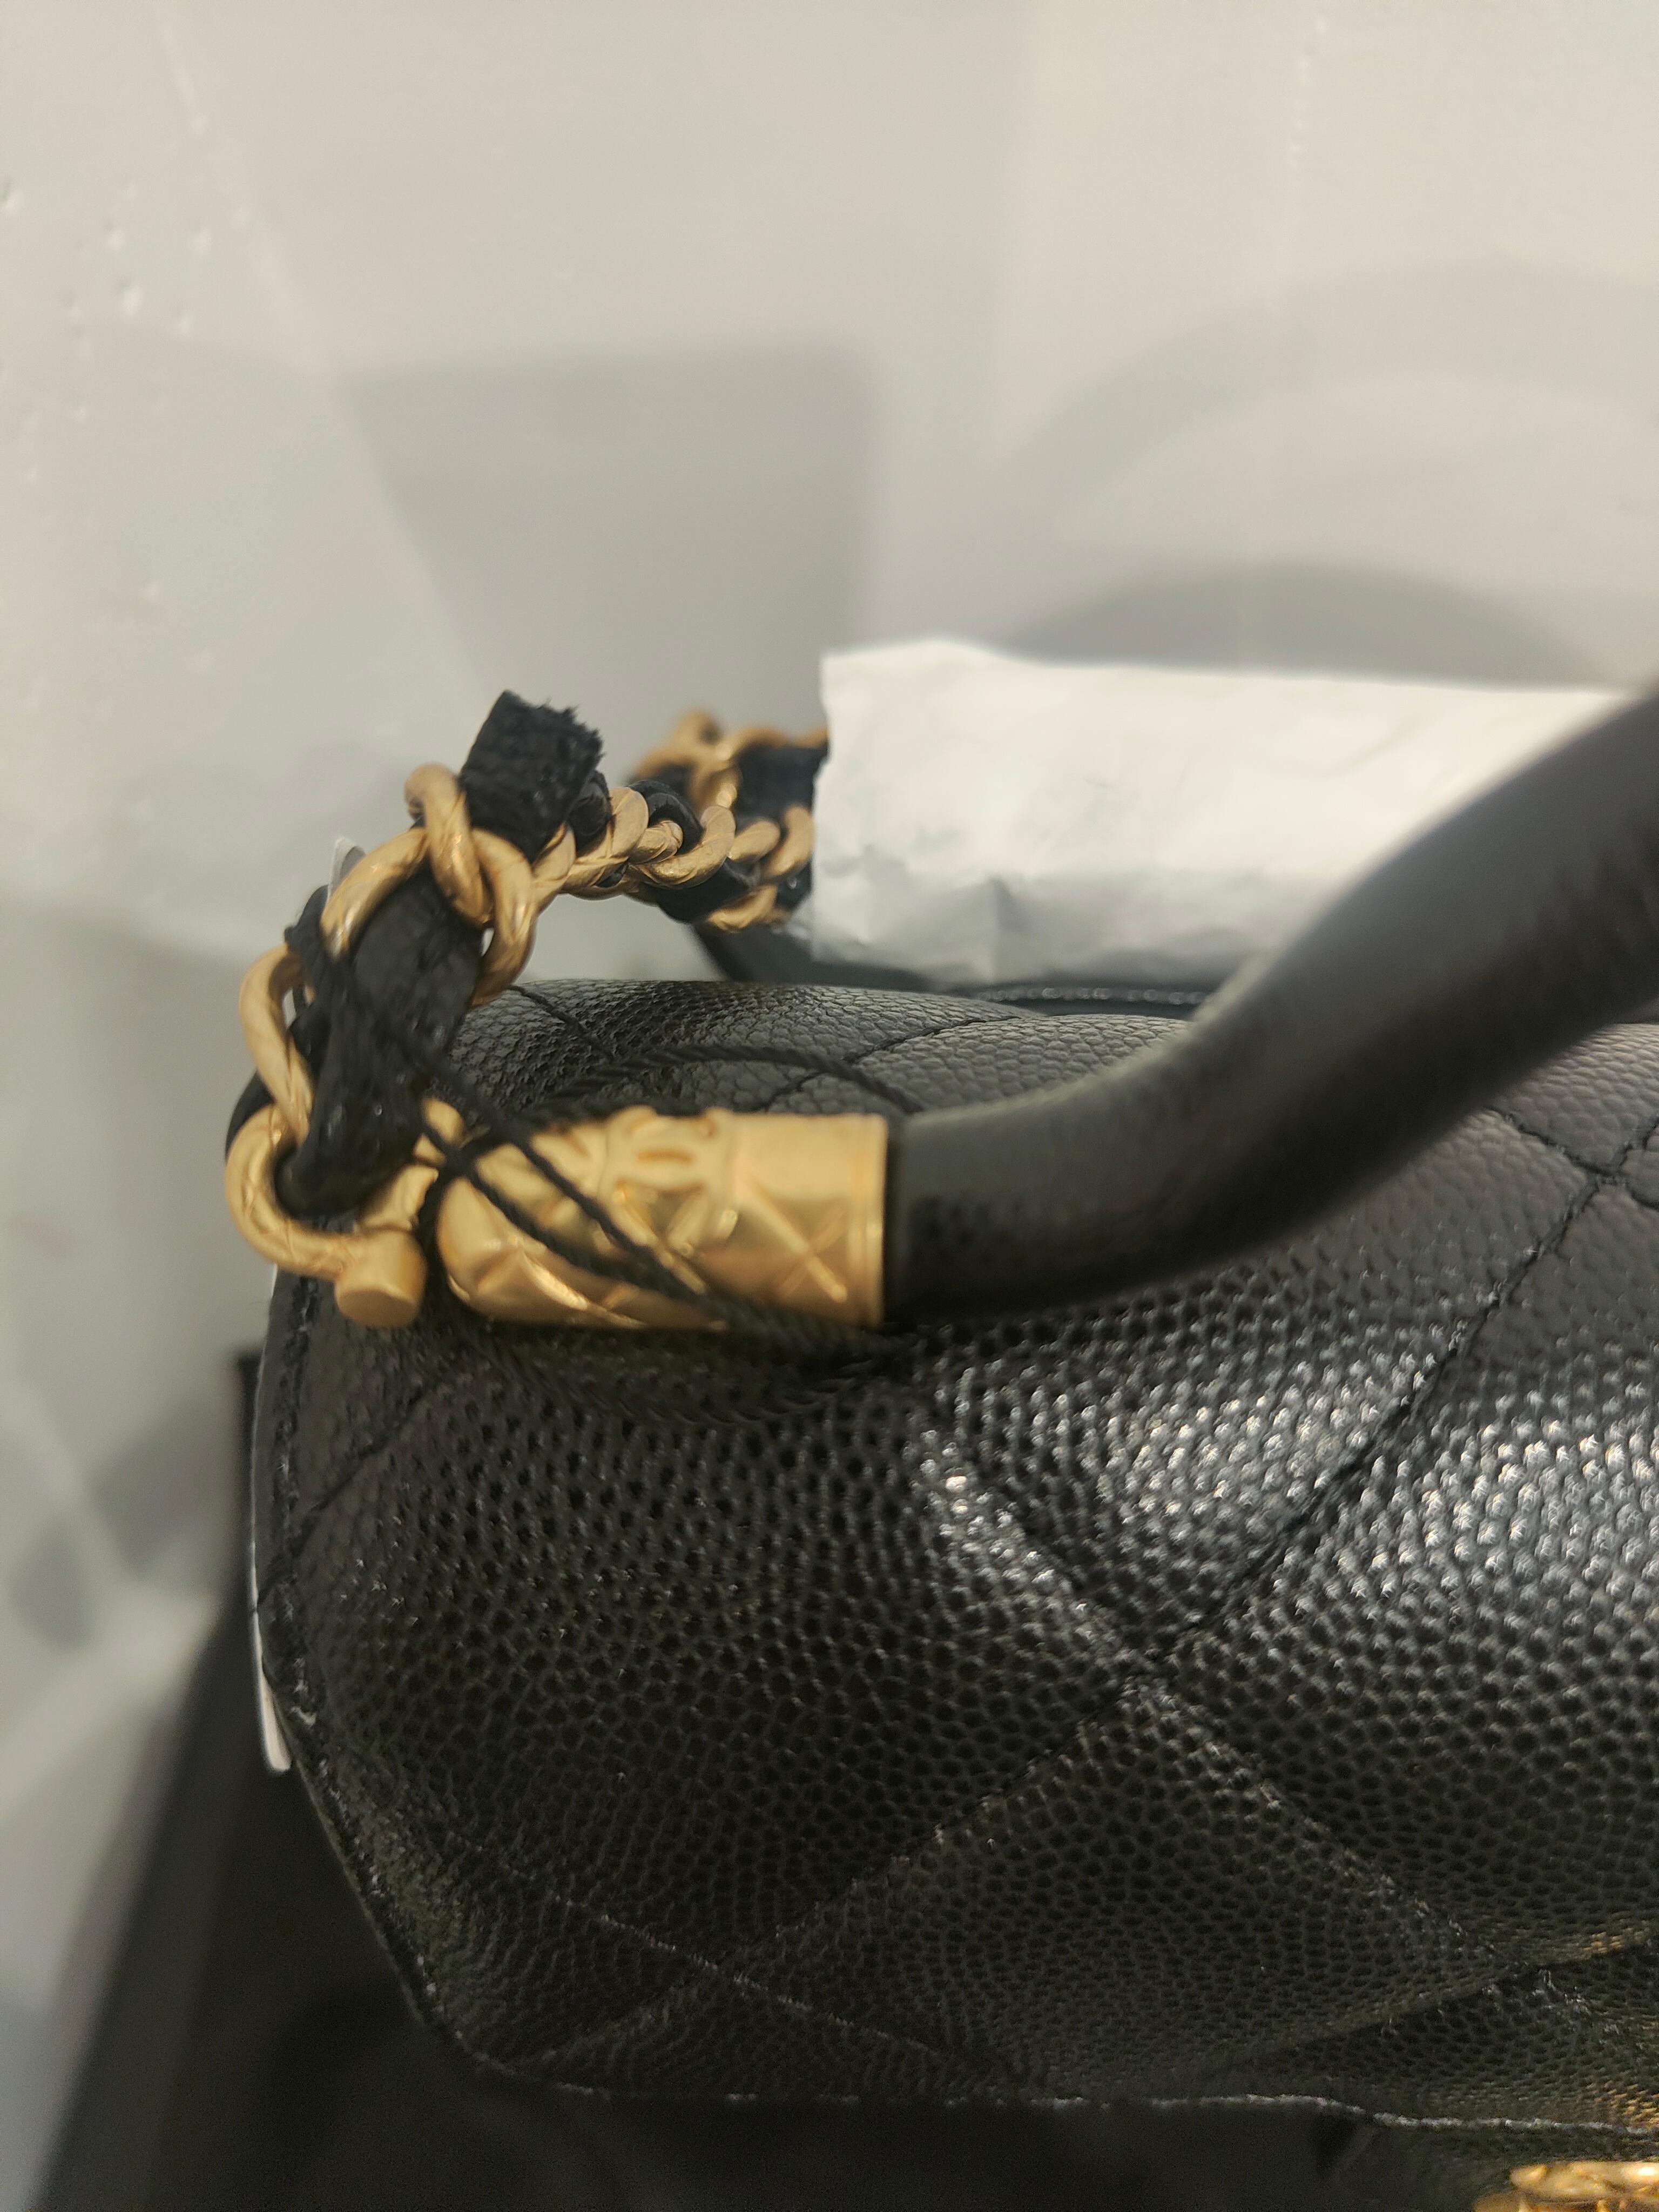 Chanel Rabat shoulder bag NWOT
Black leather Gold tone hardware shoulder bag totally made in france
Still with tags, dust bag and box 
European retail price.5500€